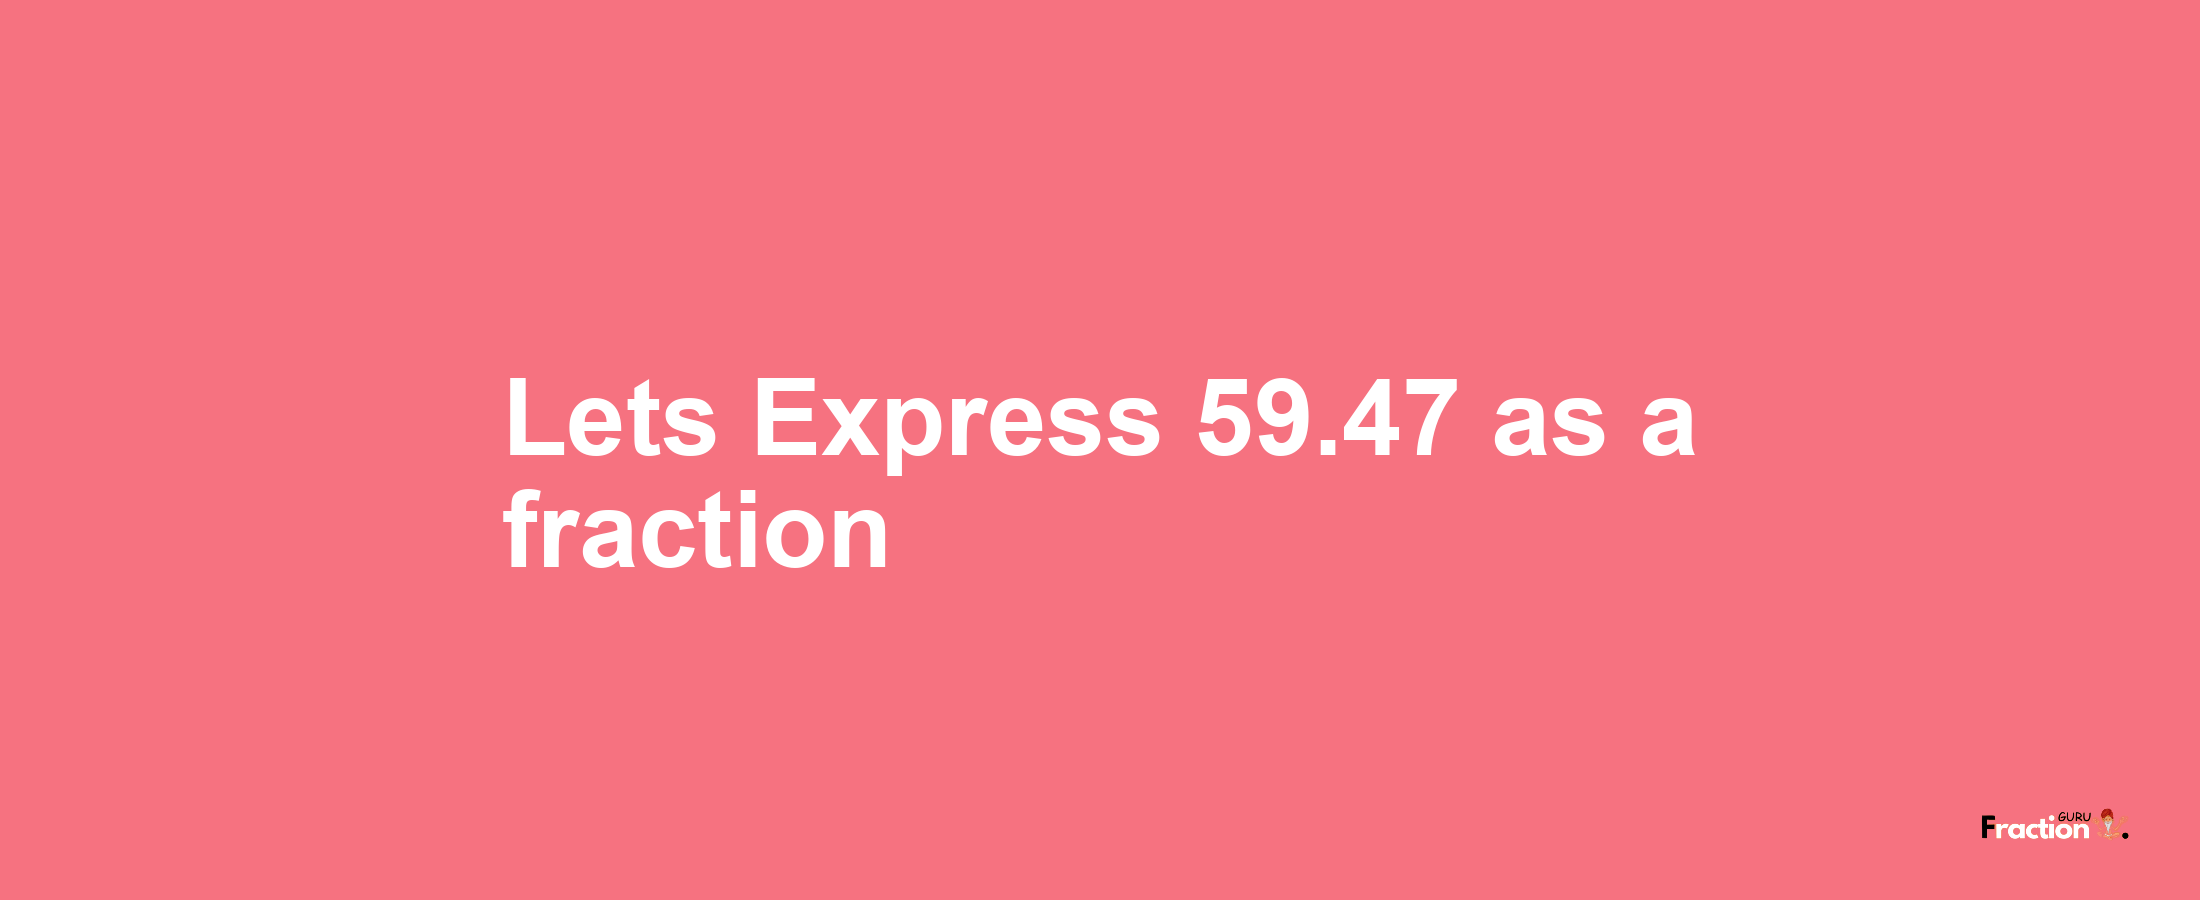 Lets Express 59.47 as afraction